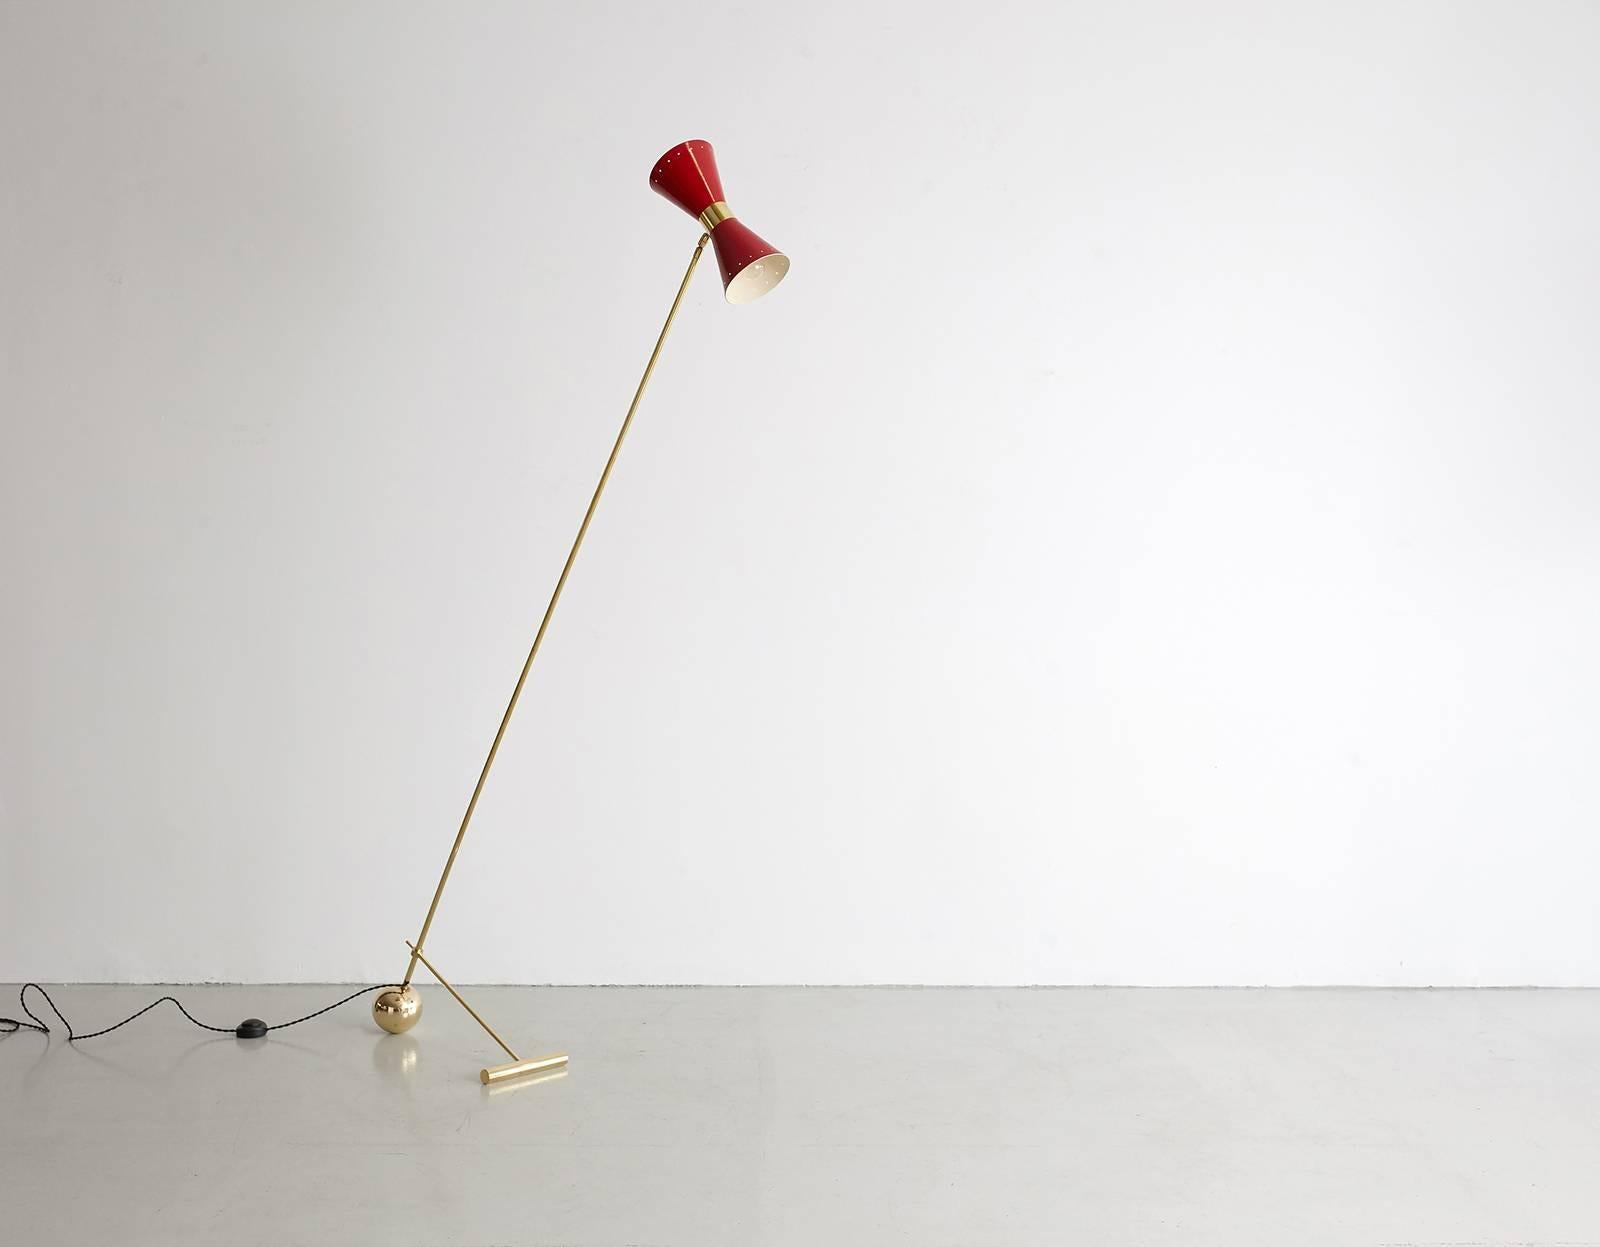 Italian floor light in the style of Stilnovo with articulating red shade, brass stem and counter weight ball foot. Newly produced in Italy and newly rewired.